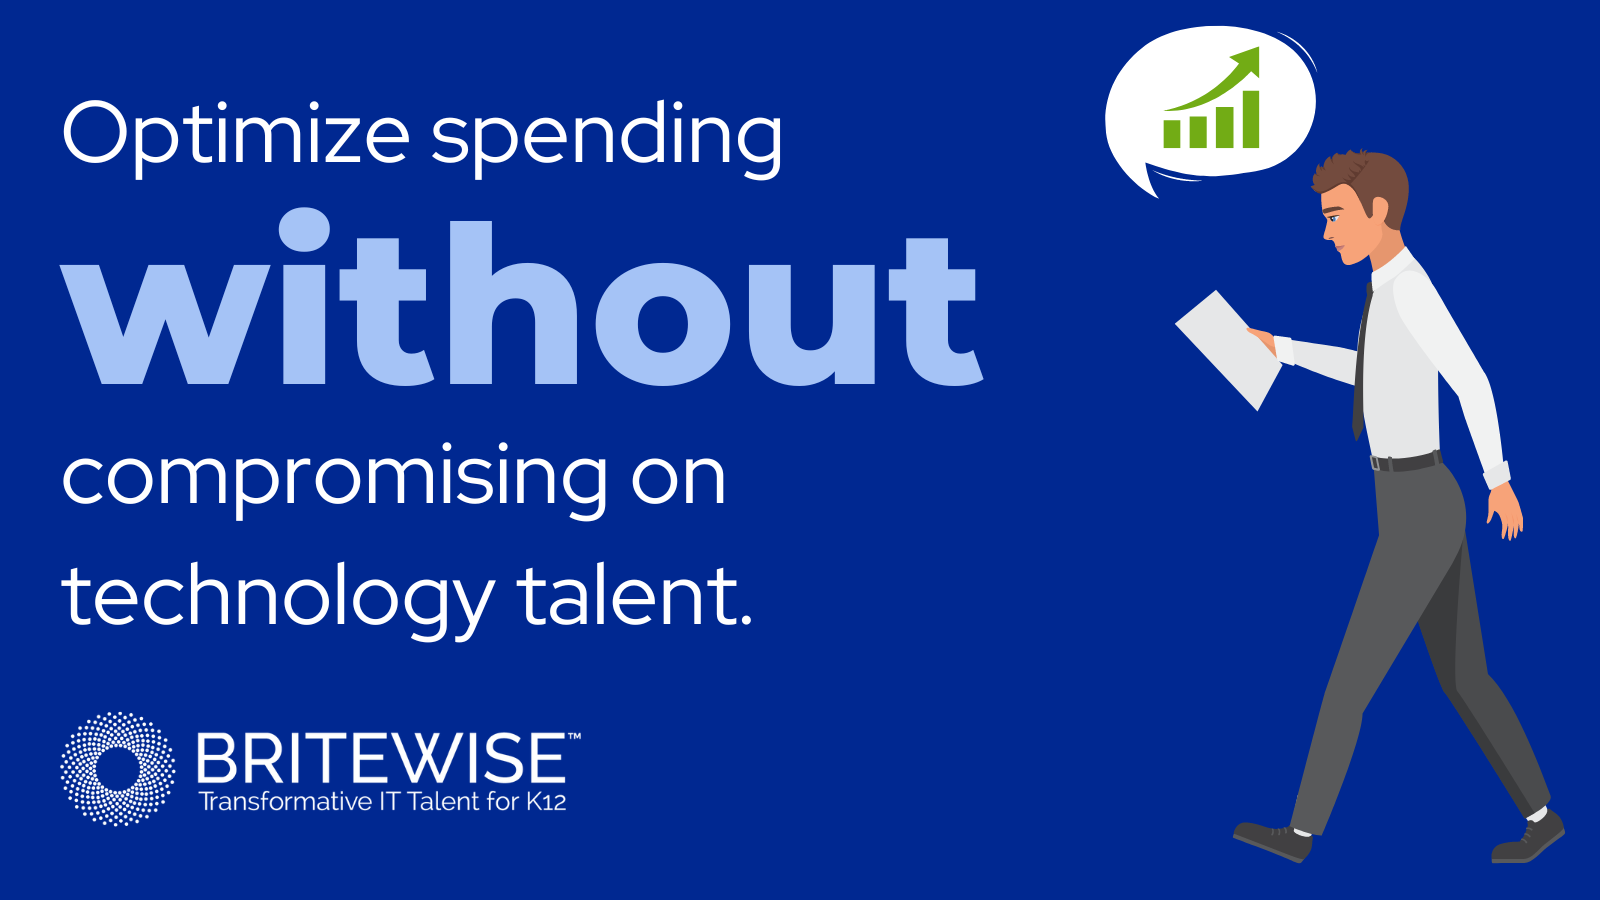 Optimize spending without compromising on technology talent with Britewise.